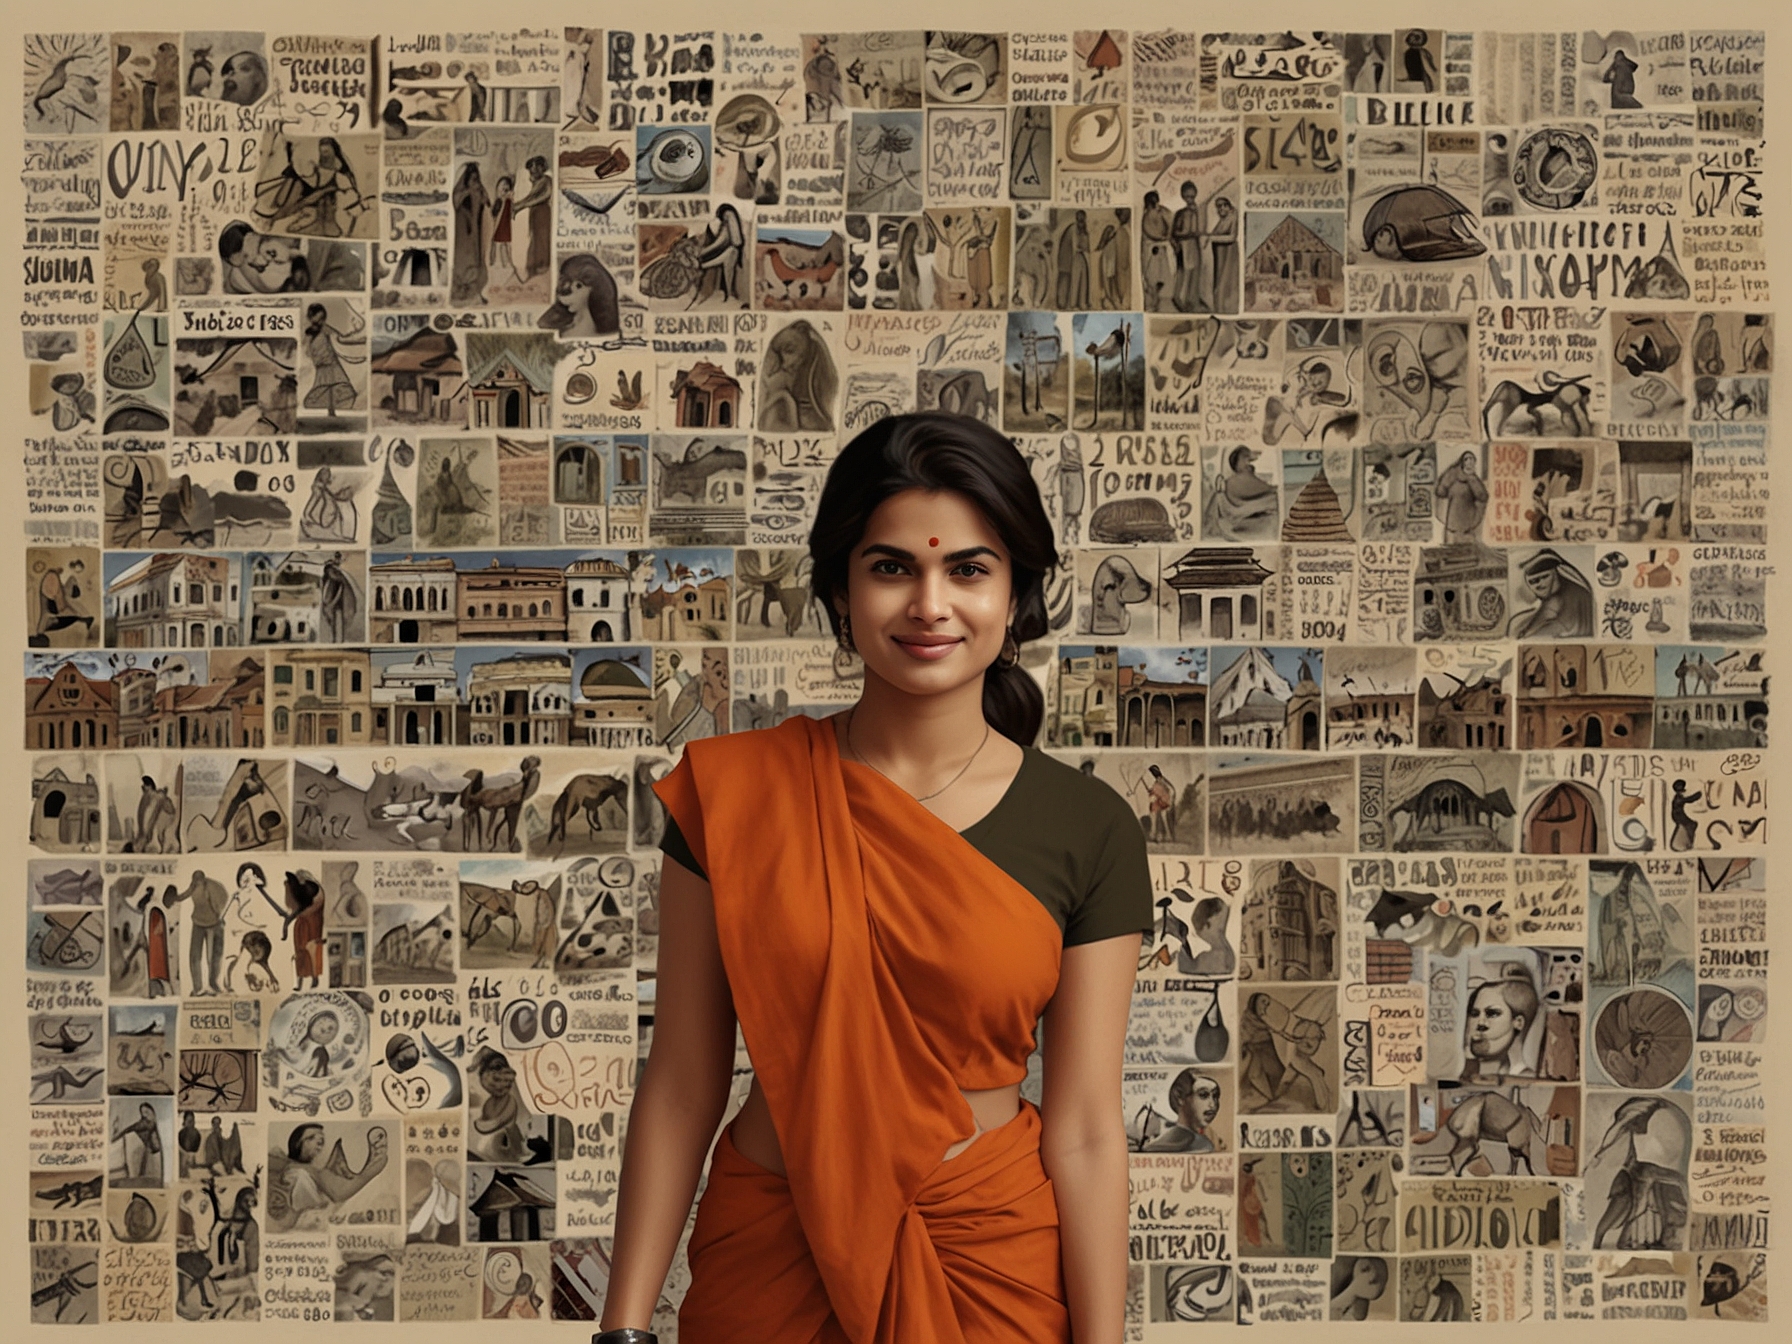 A collage illustrating the 32 addresses Priyanka has lived at, reflecting her nomadic journey and the personal and professional milestones achieved along the way.